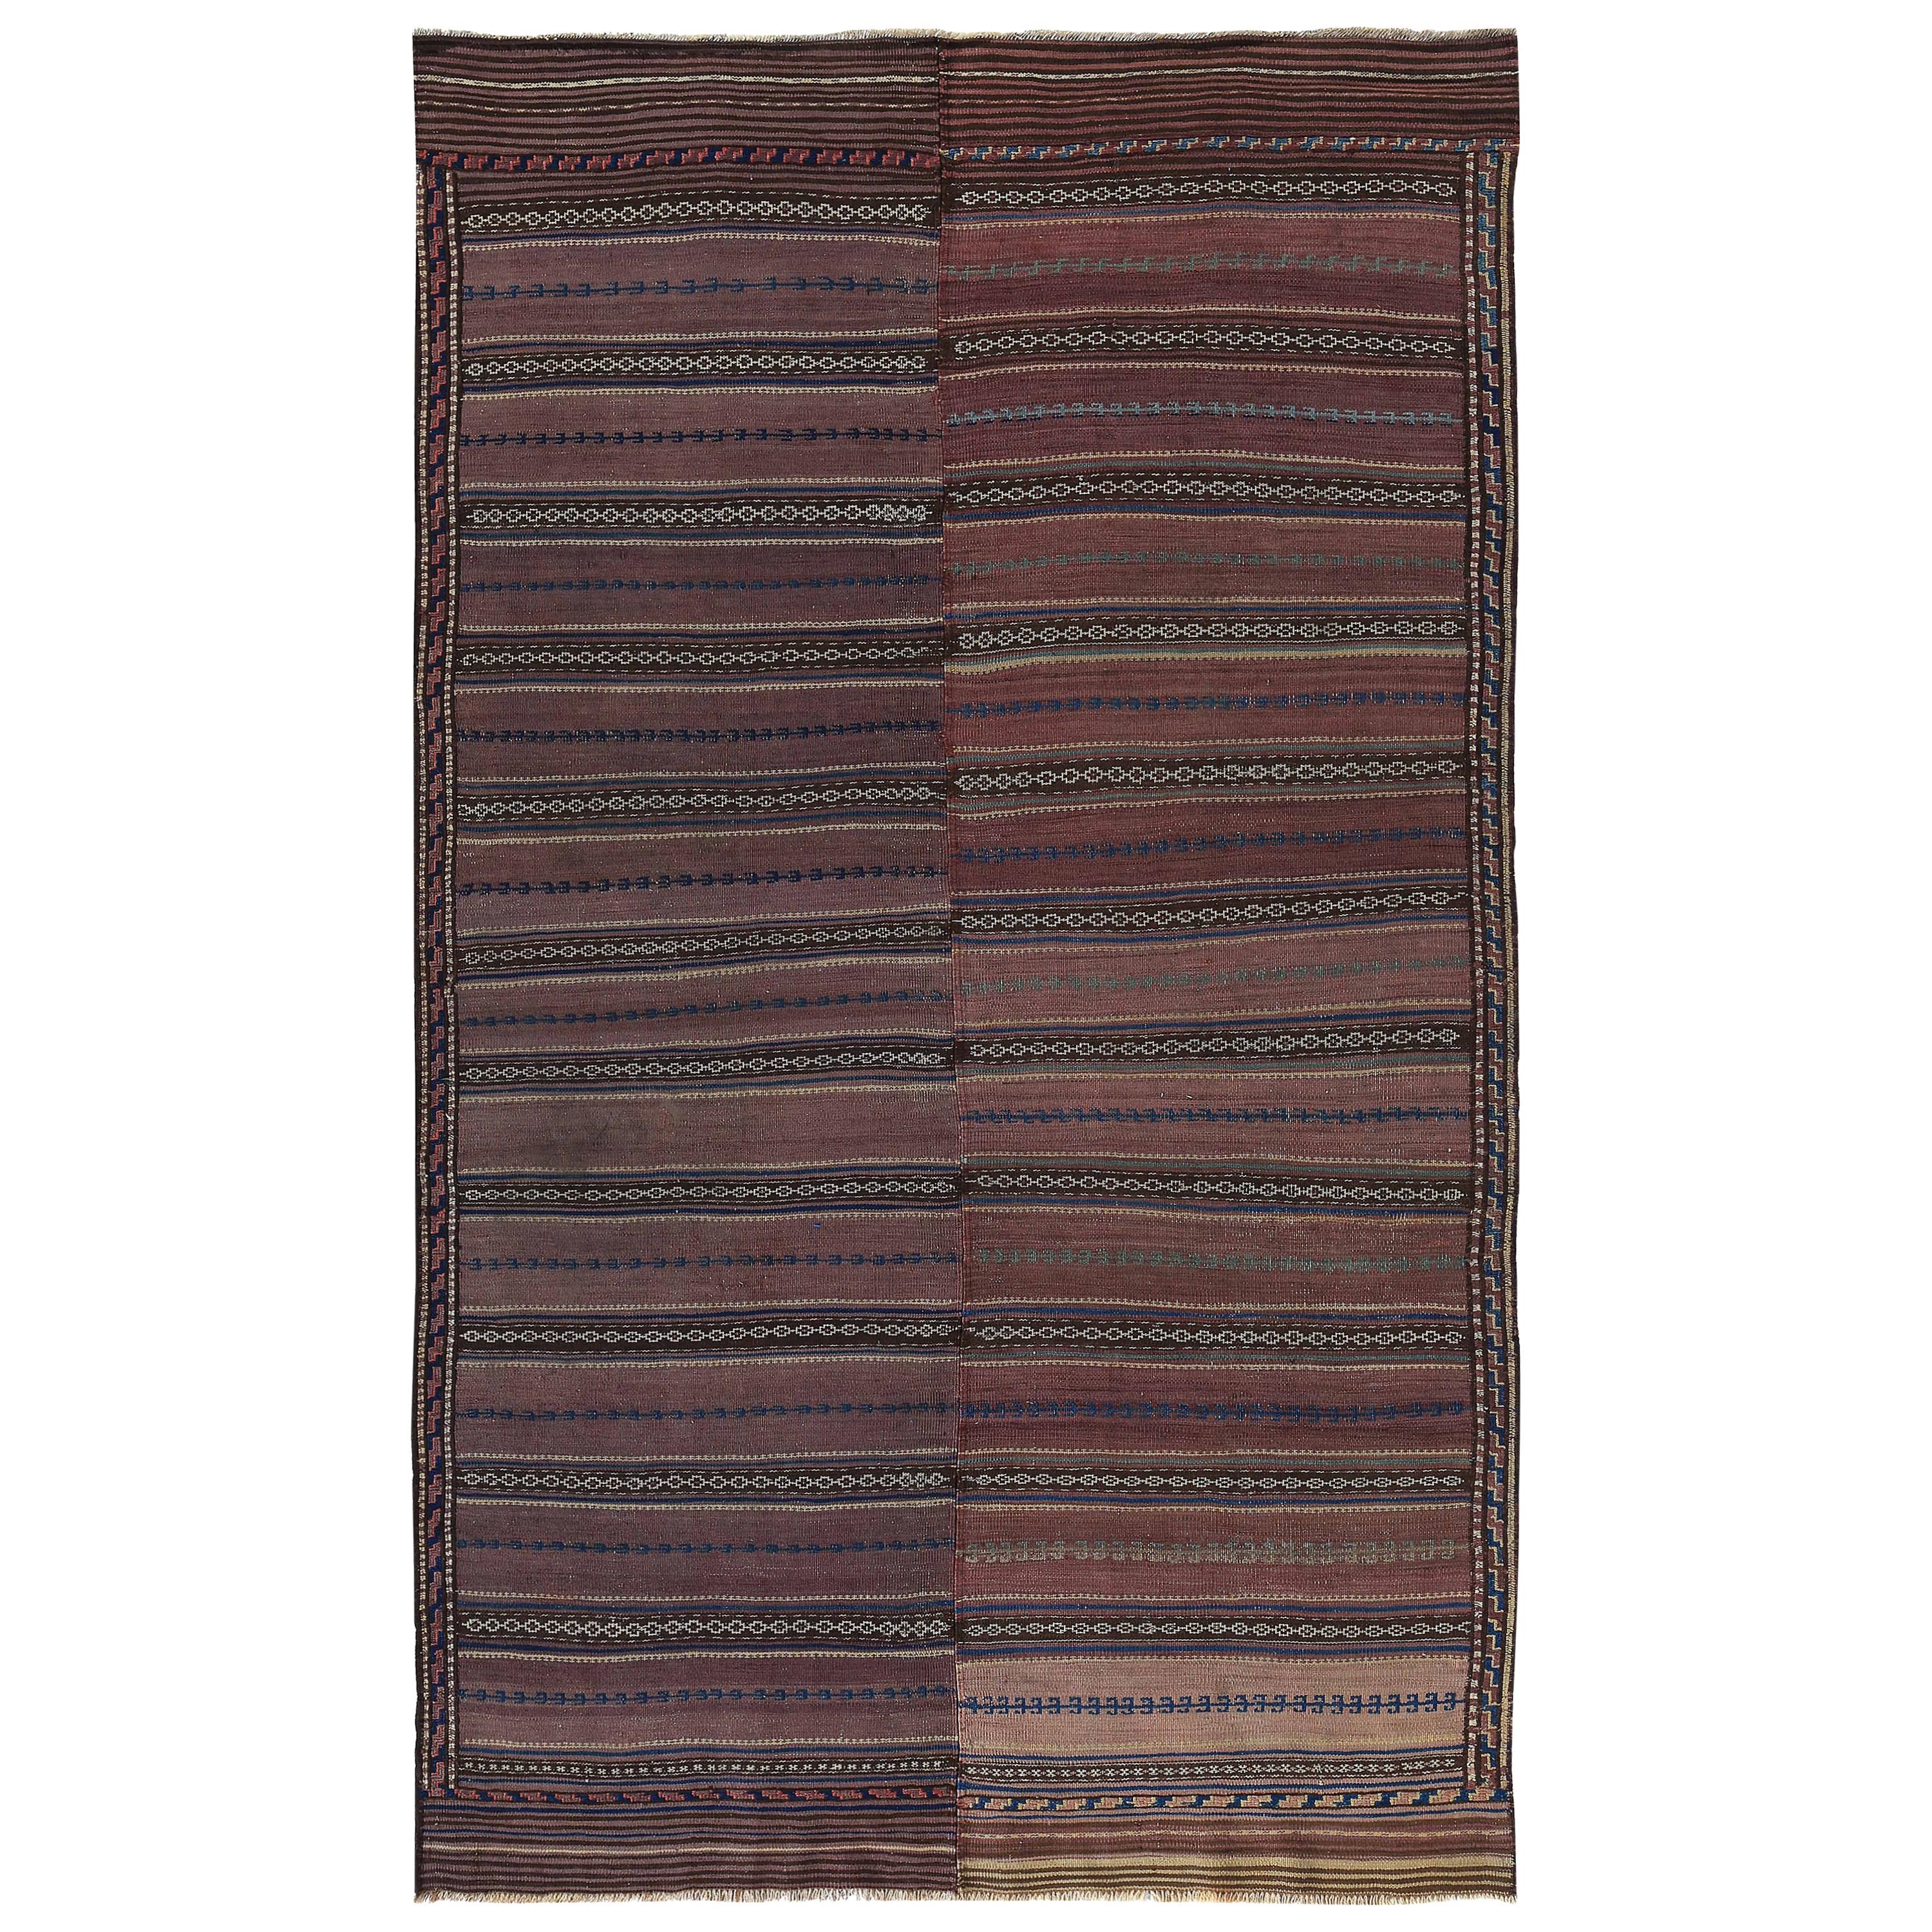 Modern Turkish Kilim Rug with Navy and White Tribal Details on Brown Field